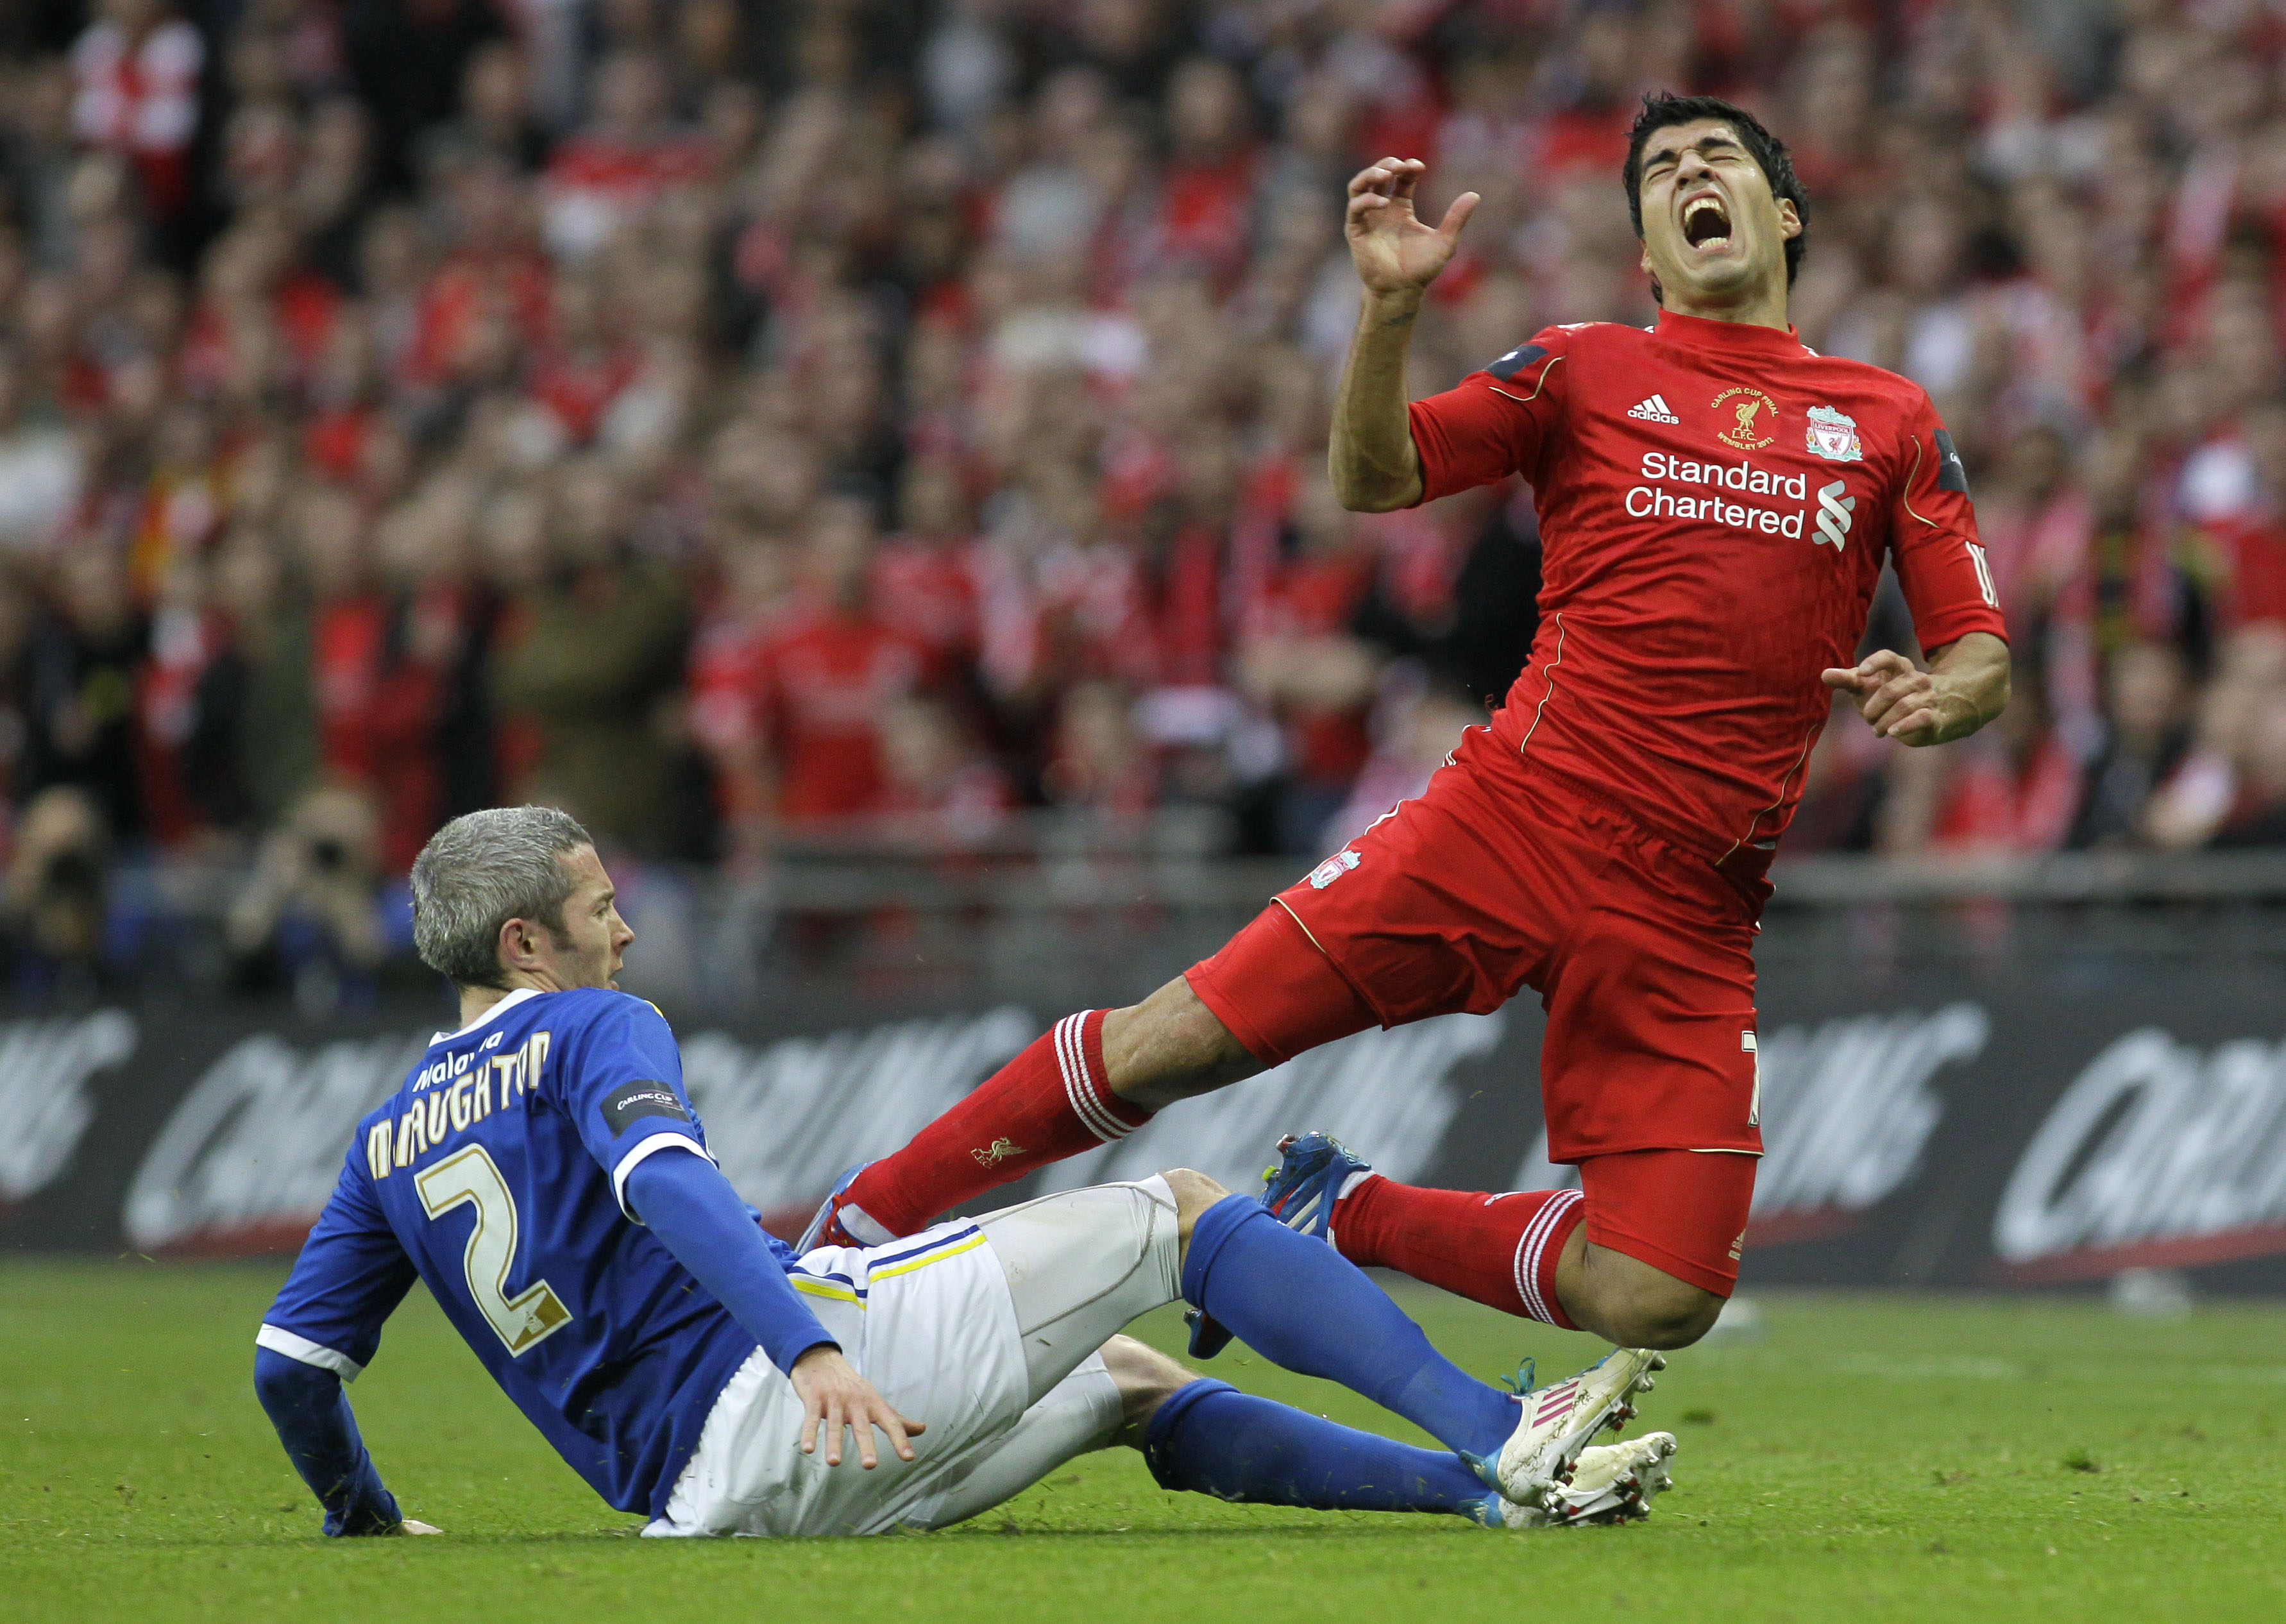 Carling Cup, Liverpool, England, Cardiff, Final